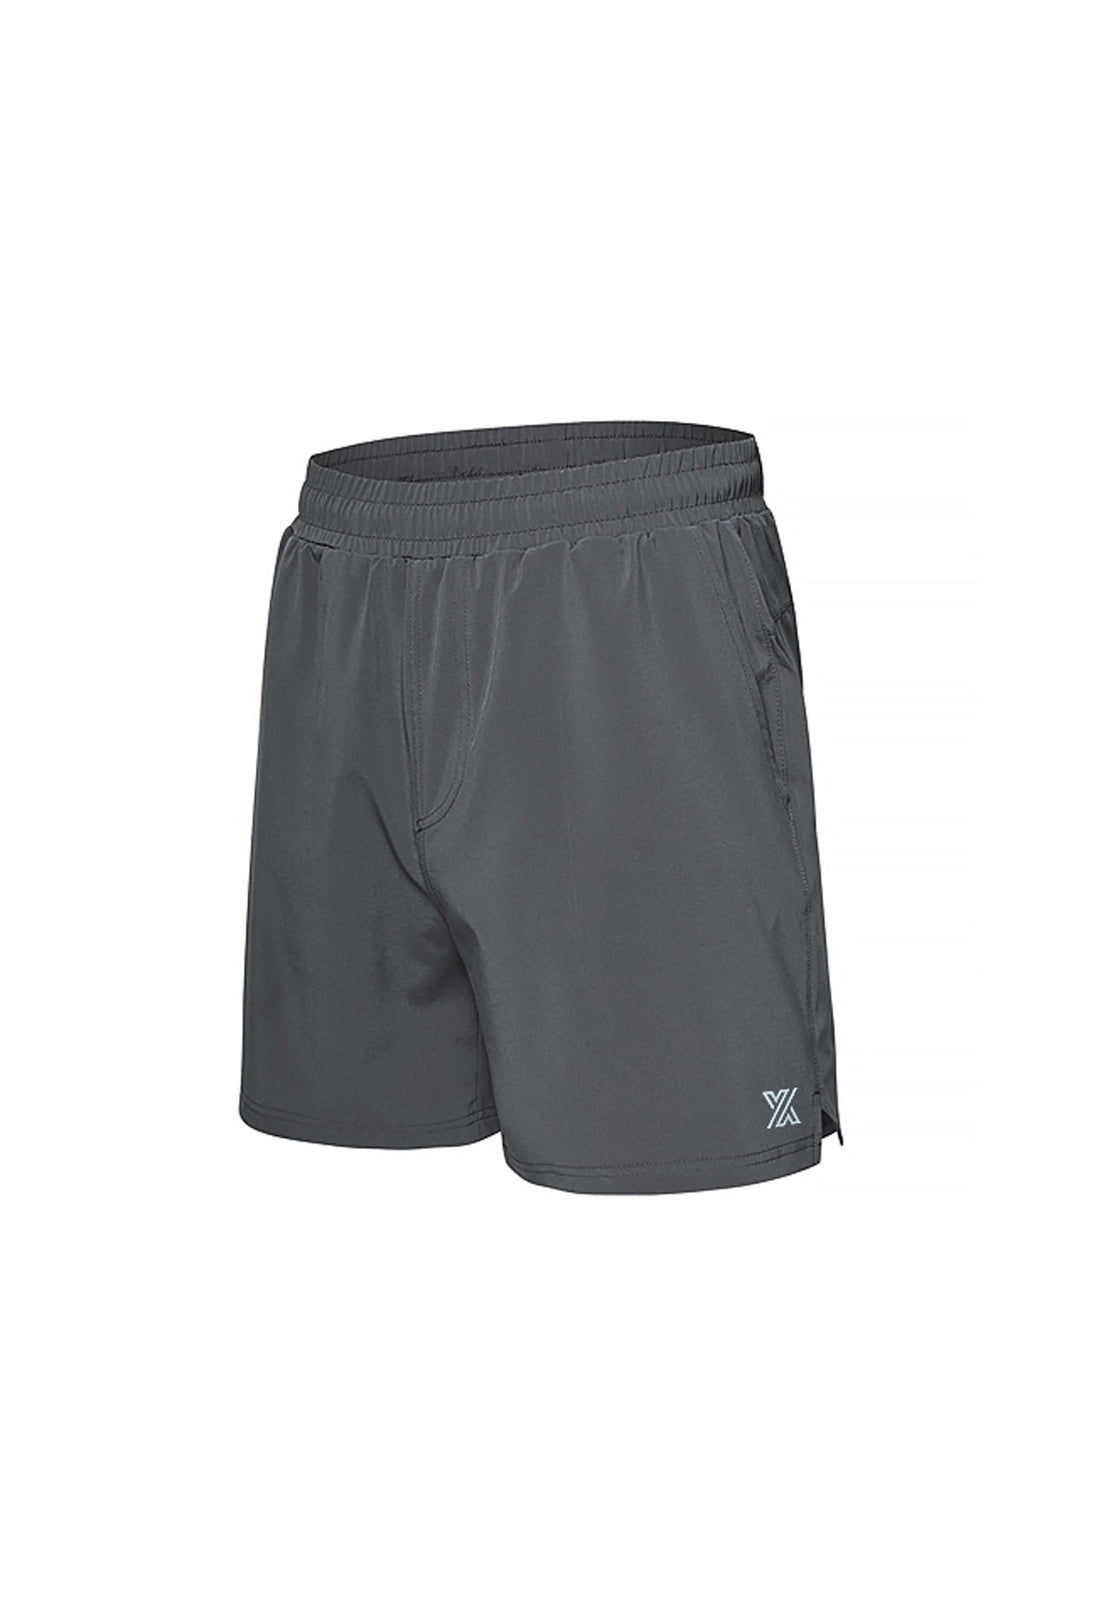 Exid Cooling 5 inch Shorts - Smog Gray